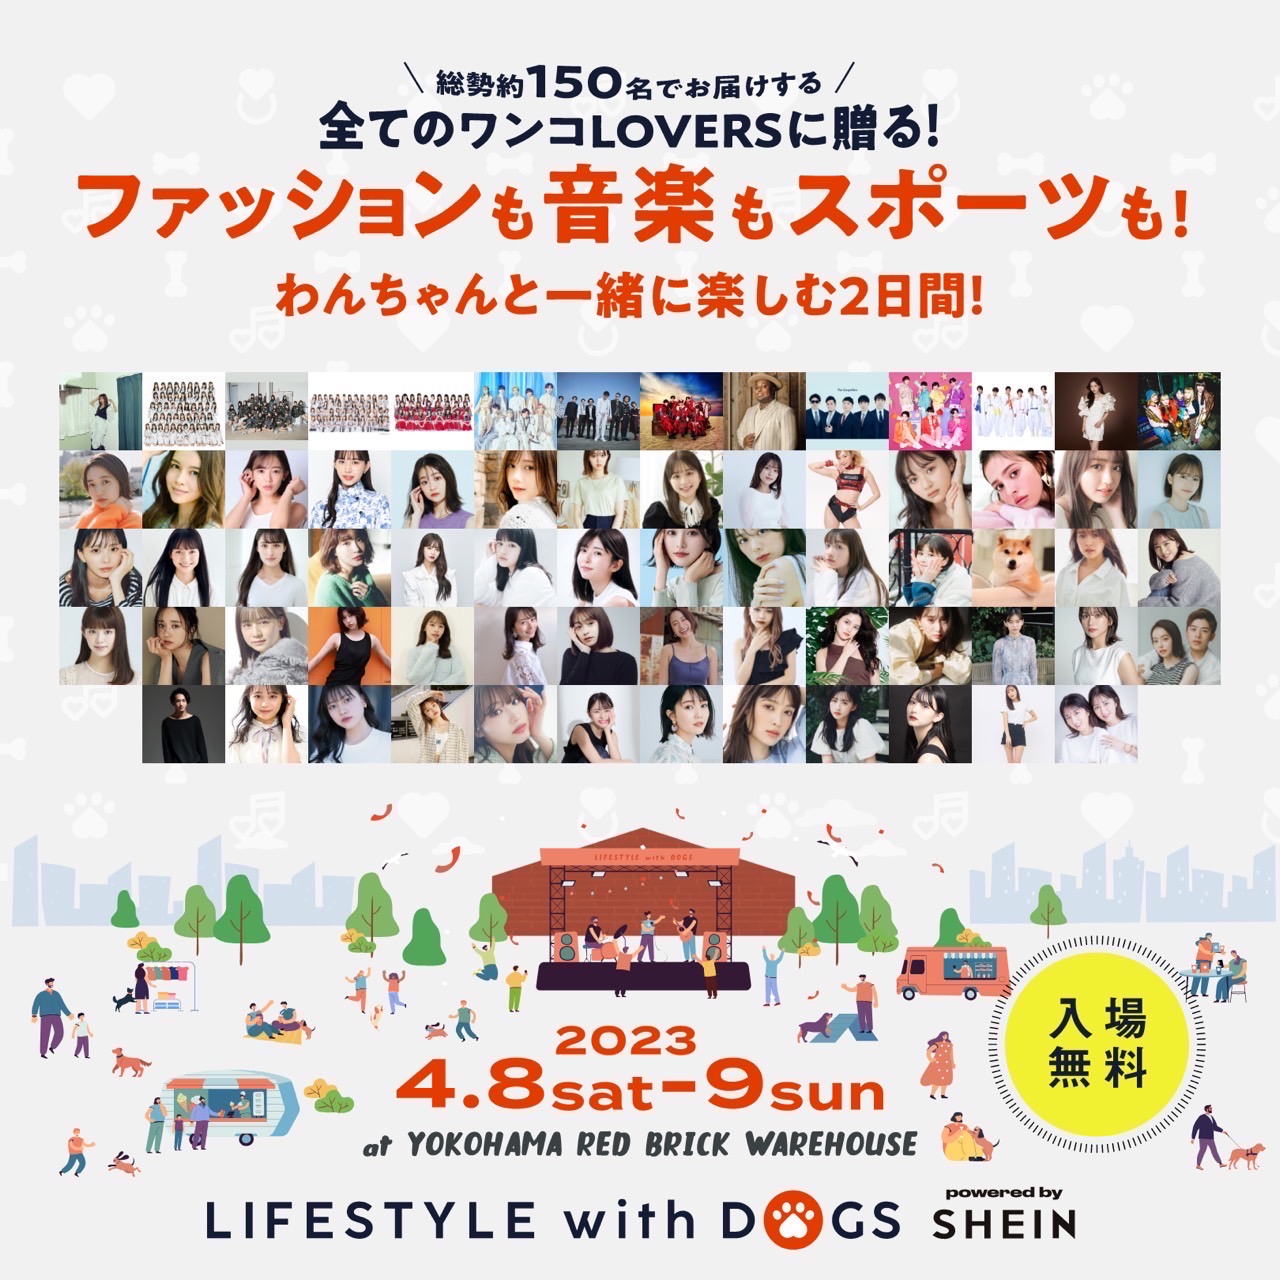 LIFESTYLE with DOGSの写真入りビジュアル